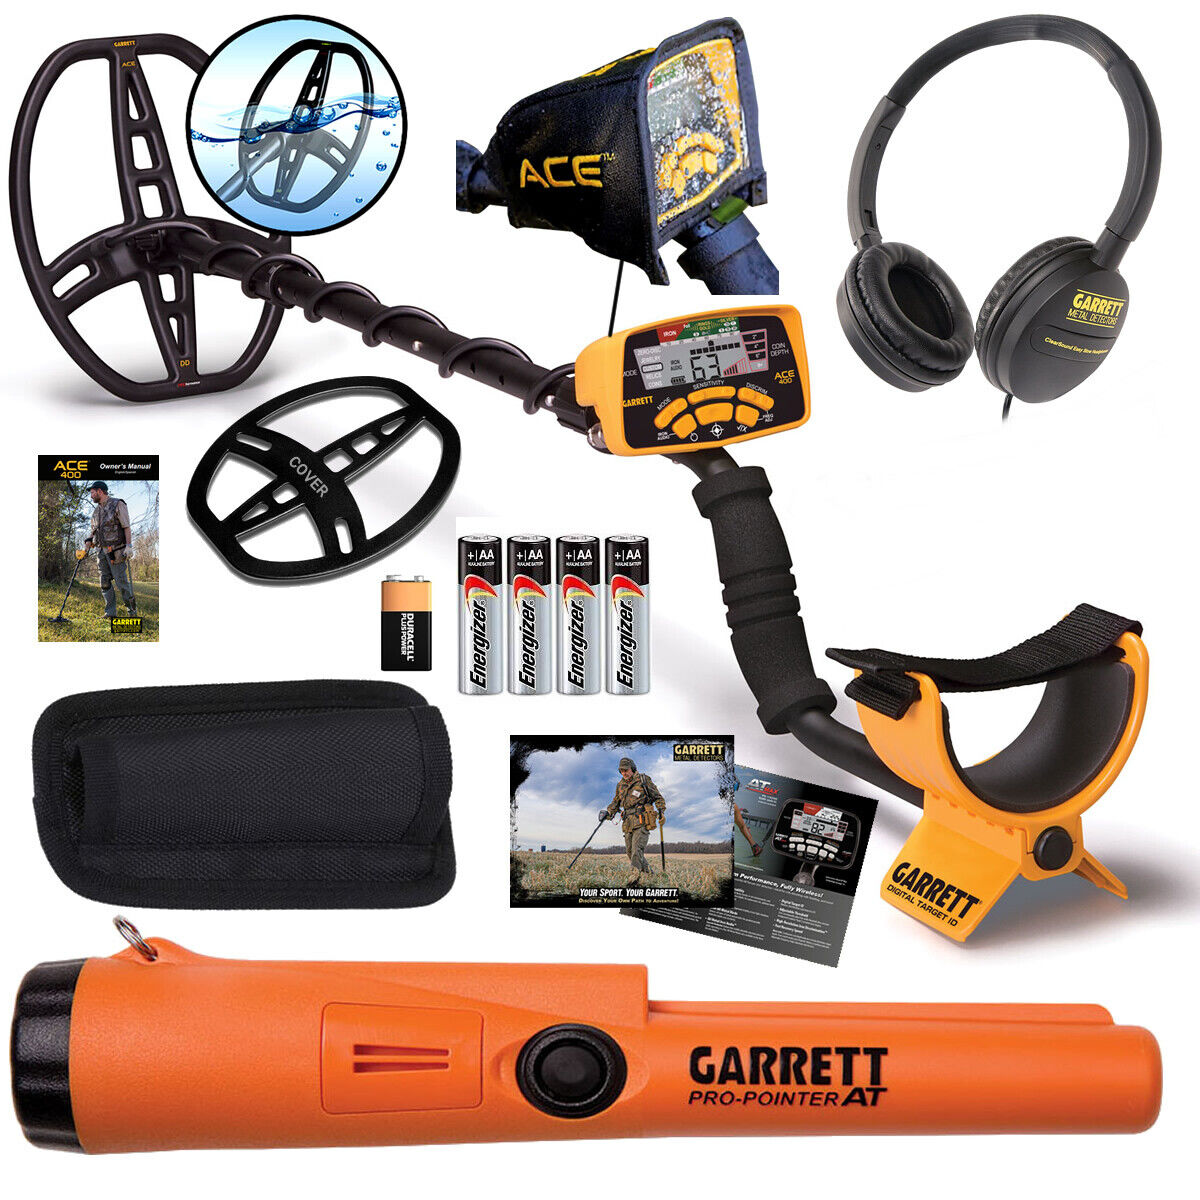 Garrett ACE 400 Metal Detector with Pro-Pointer AT Waterproof Pinpointer & more